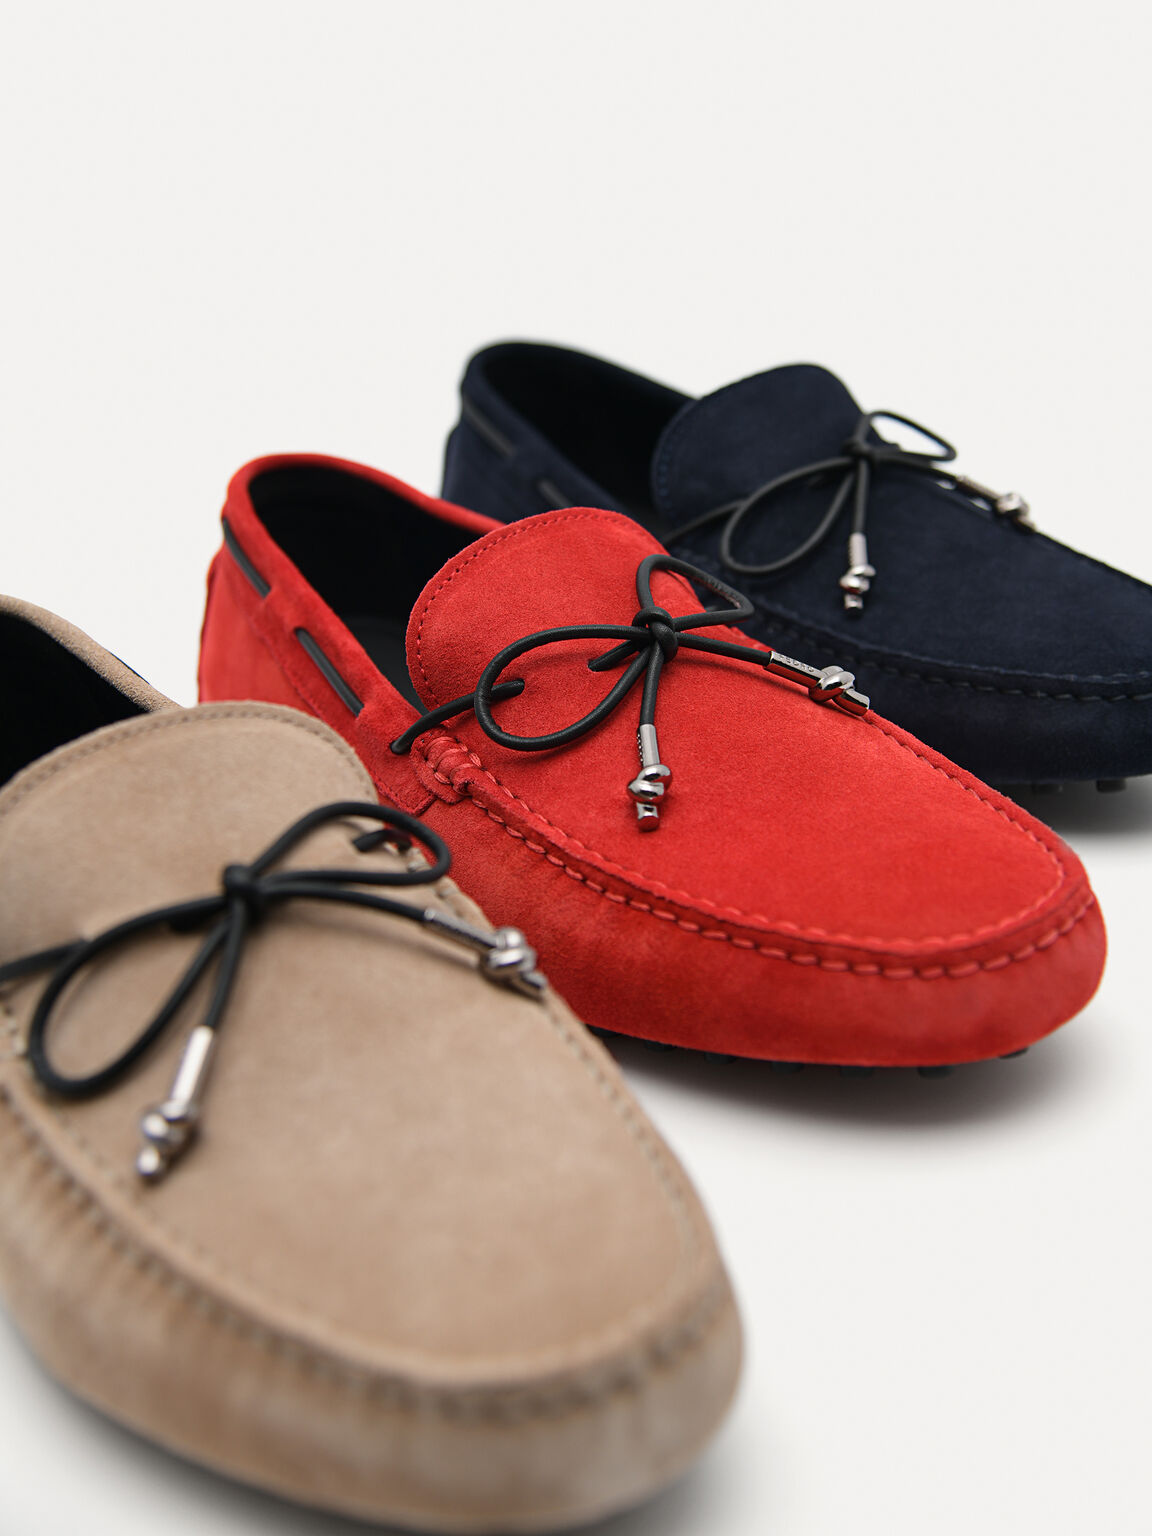 Suede Moccasins with Metal-dipped Laces, Red